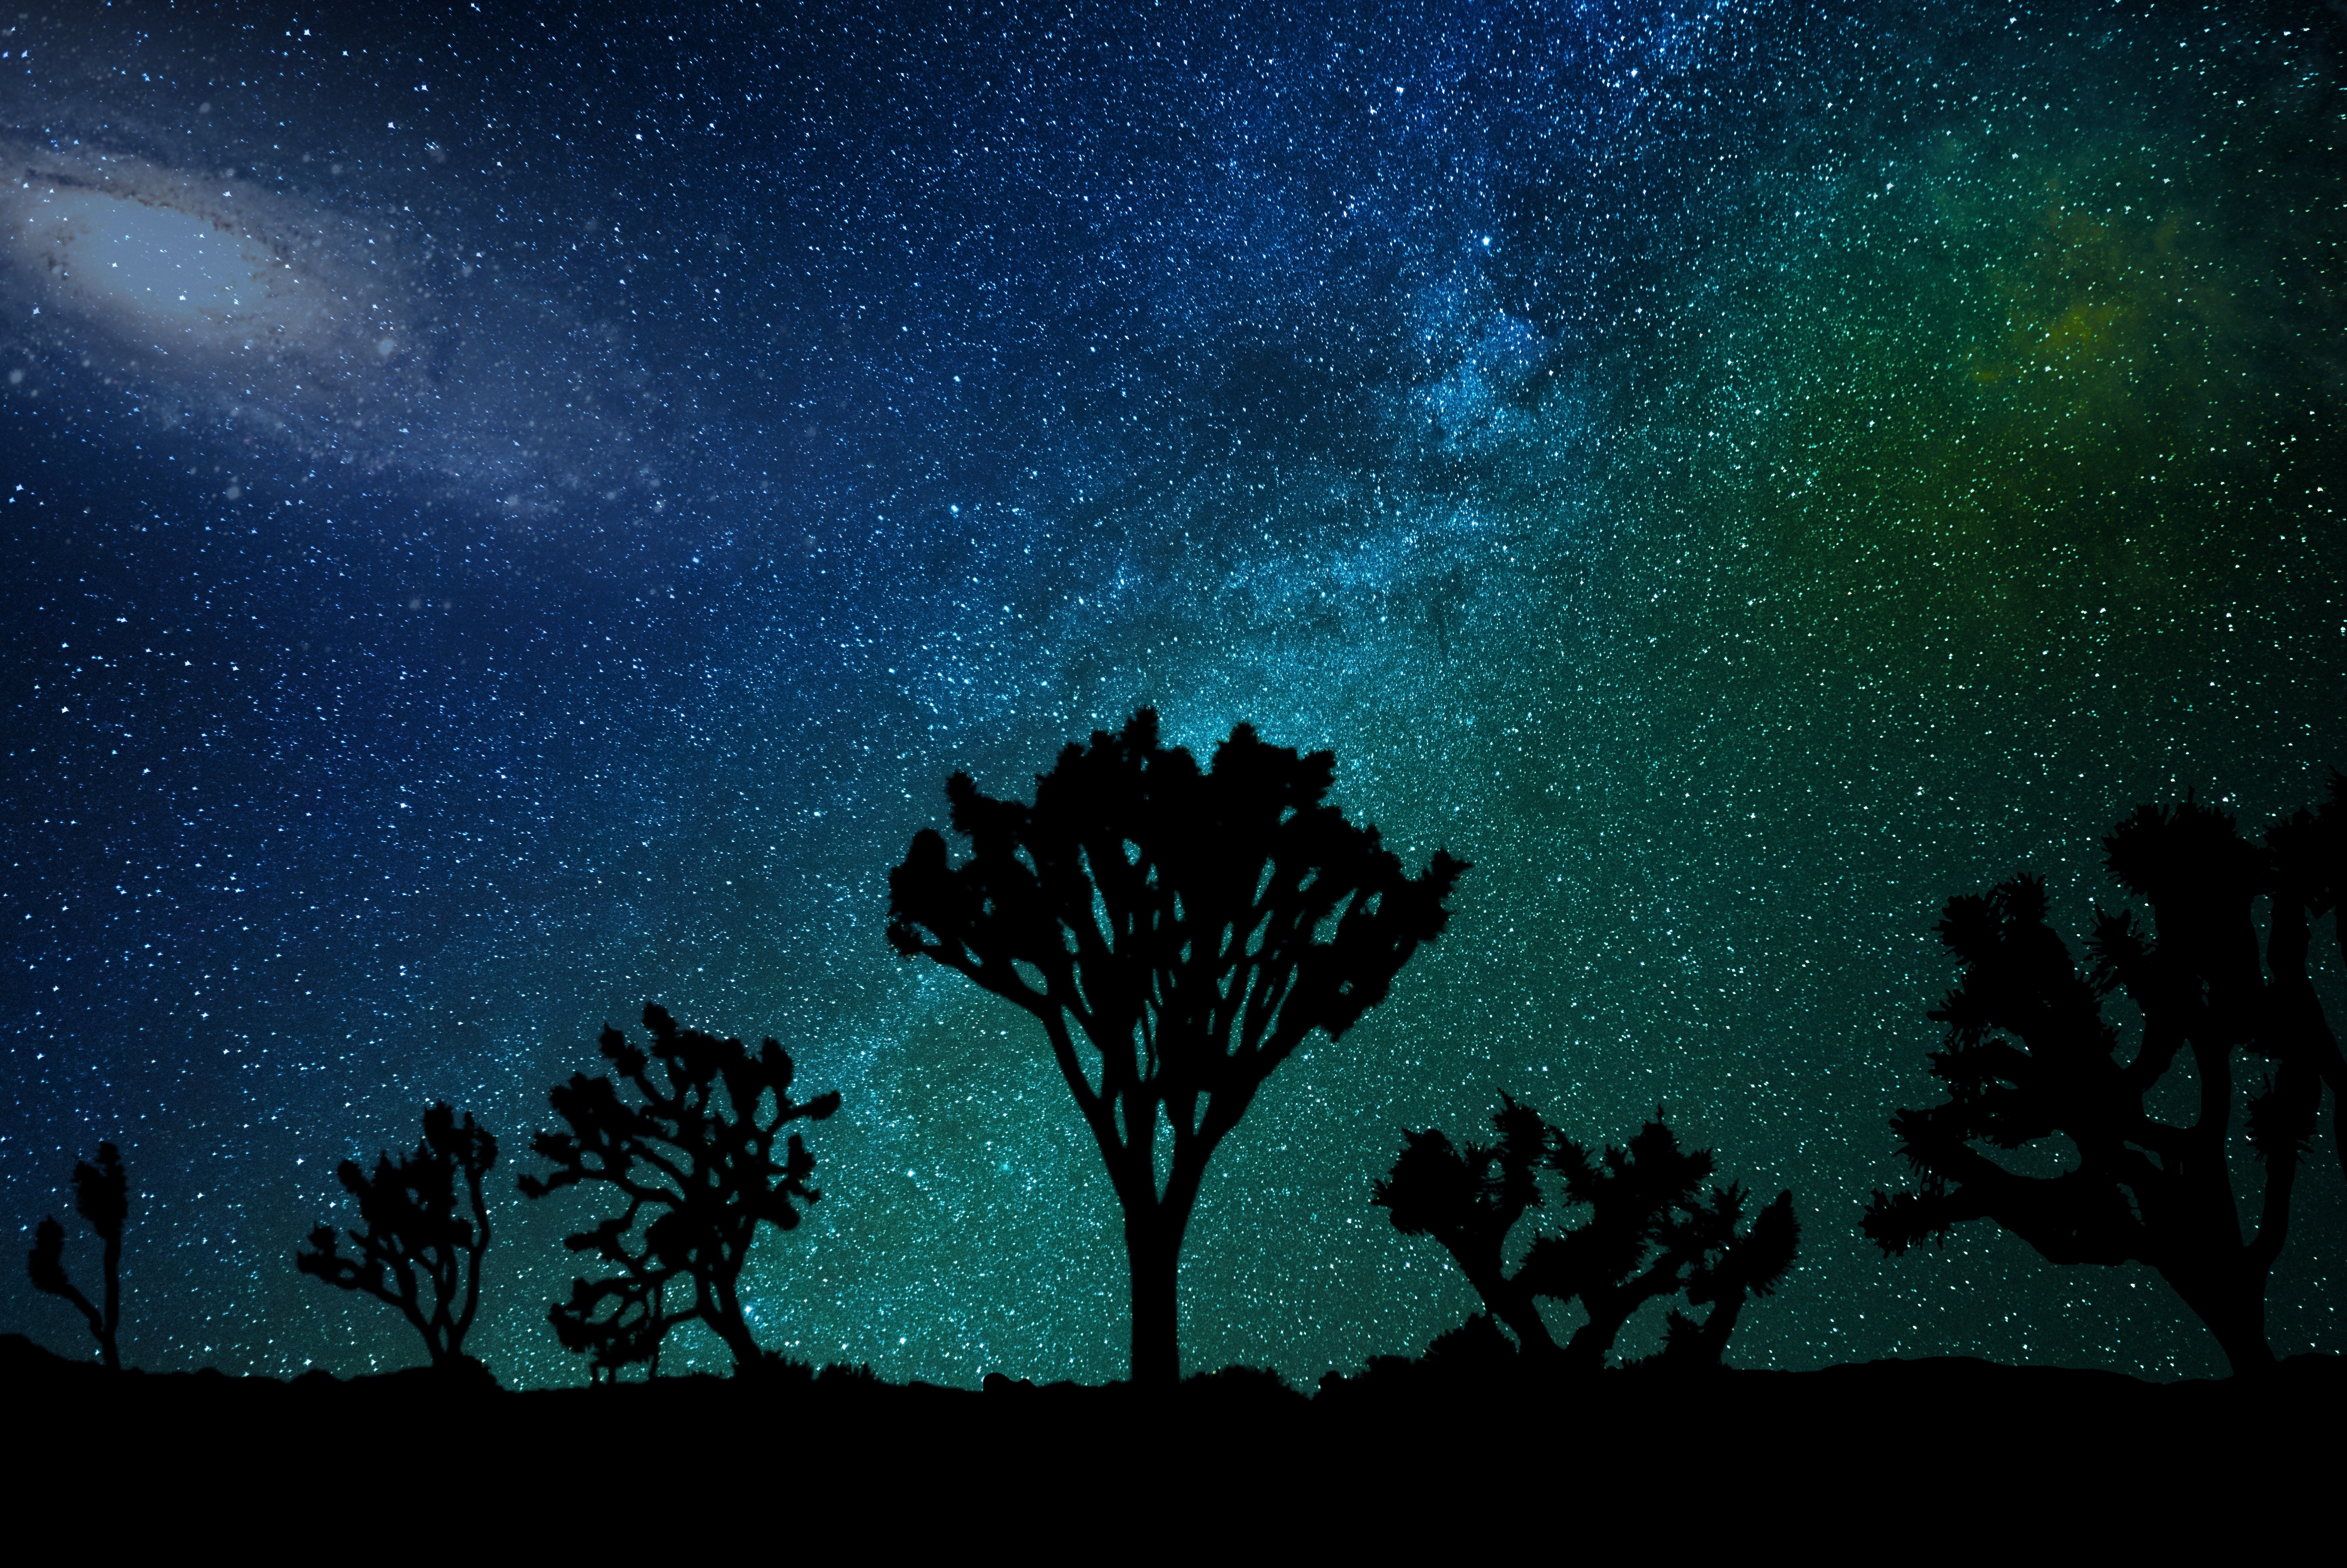 Wallpaper for mobile devices nature, joshua tree, starry sky